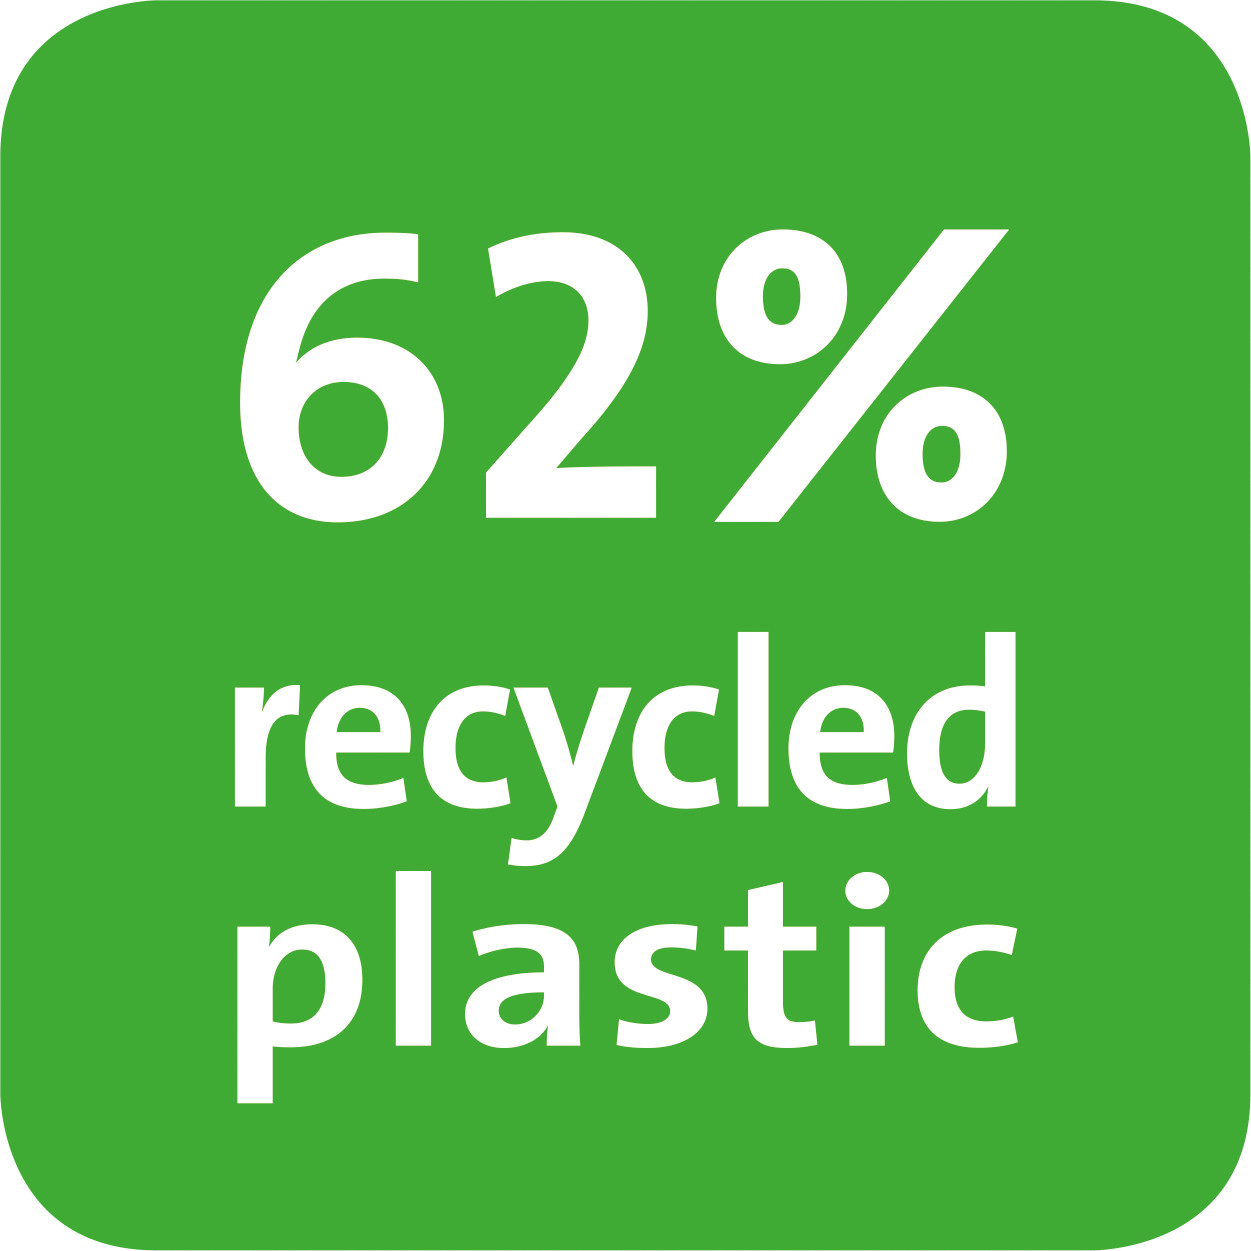 The value indicates the product’s content of recycled plastic in percent